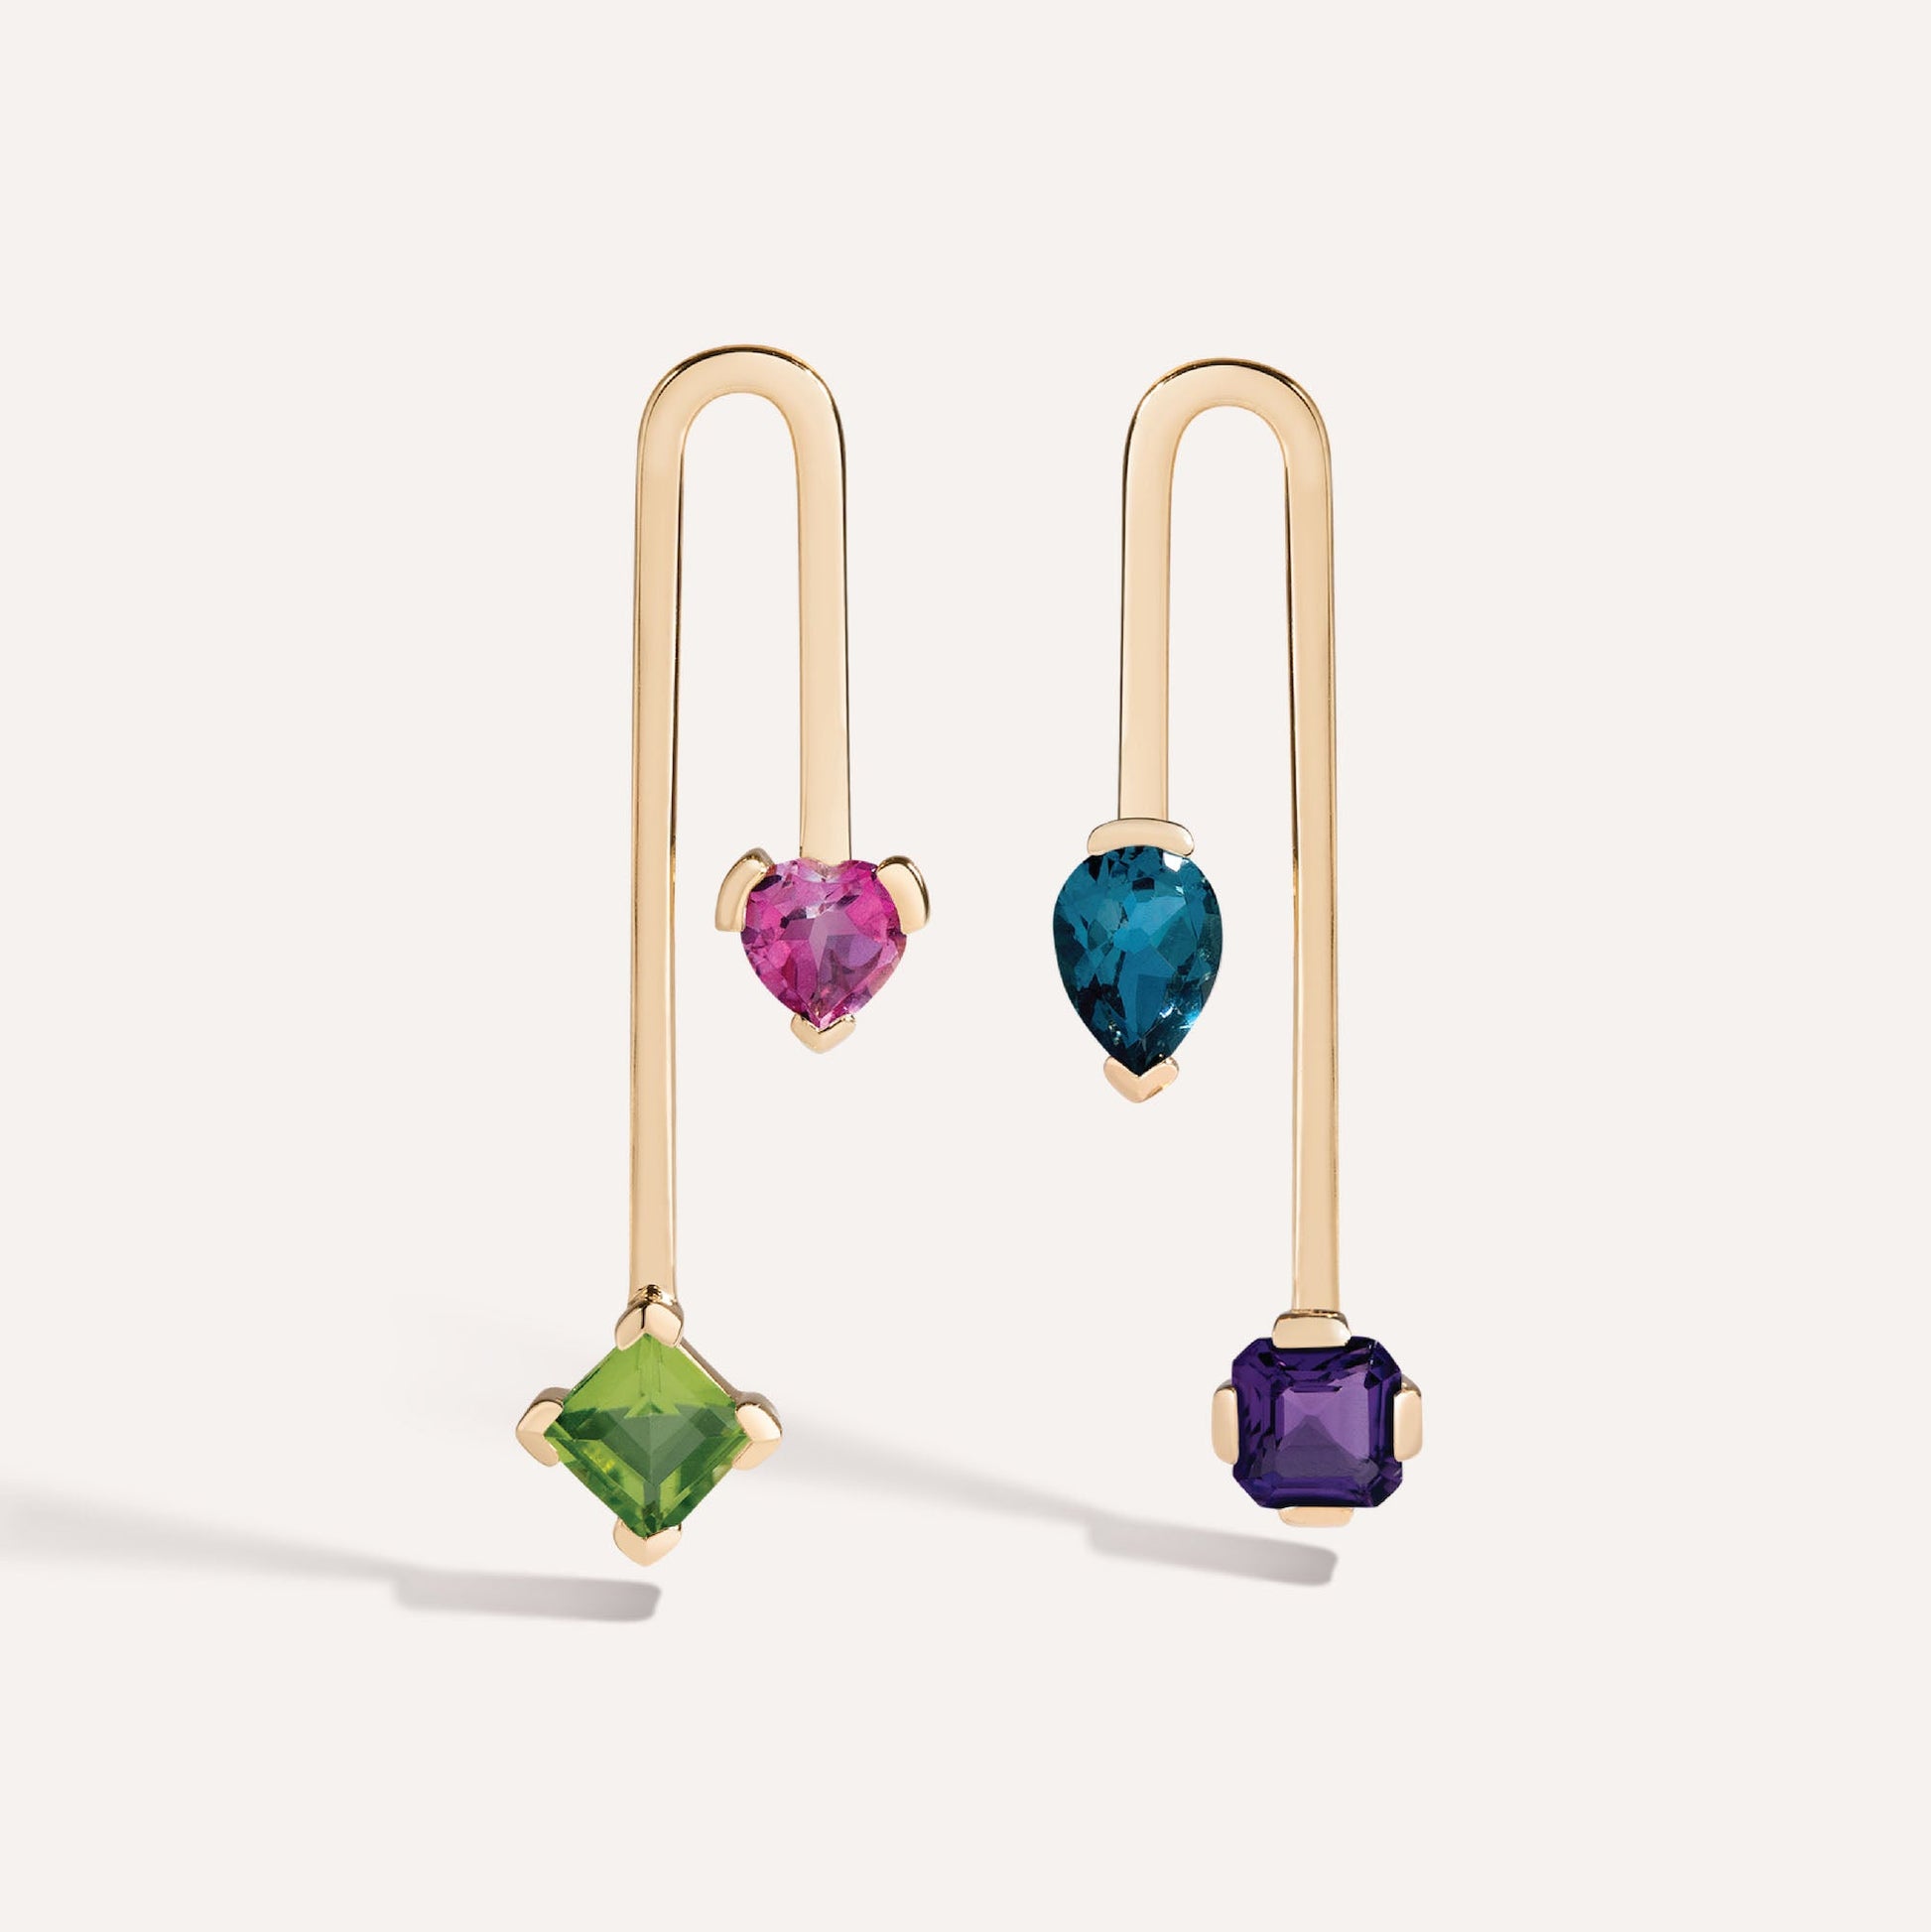 Valentine's Day Earring Studs - Voyagers dream jewelry